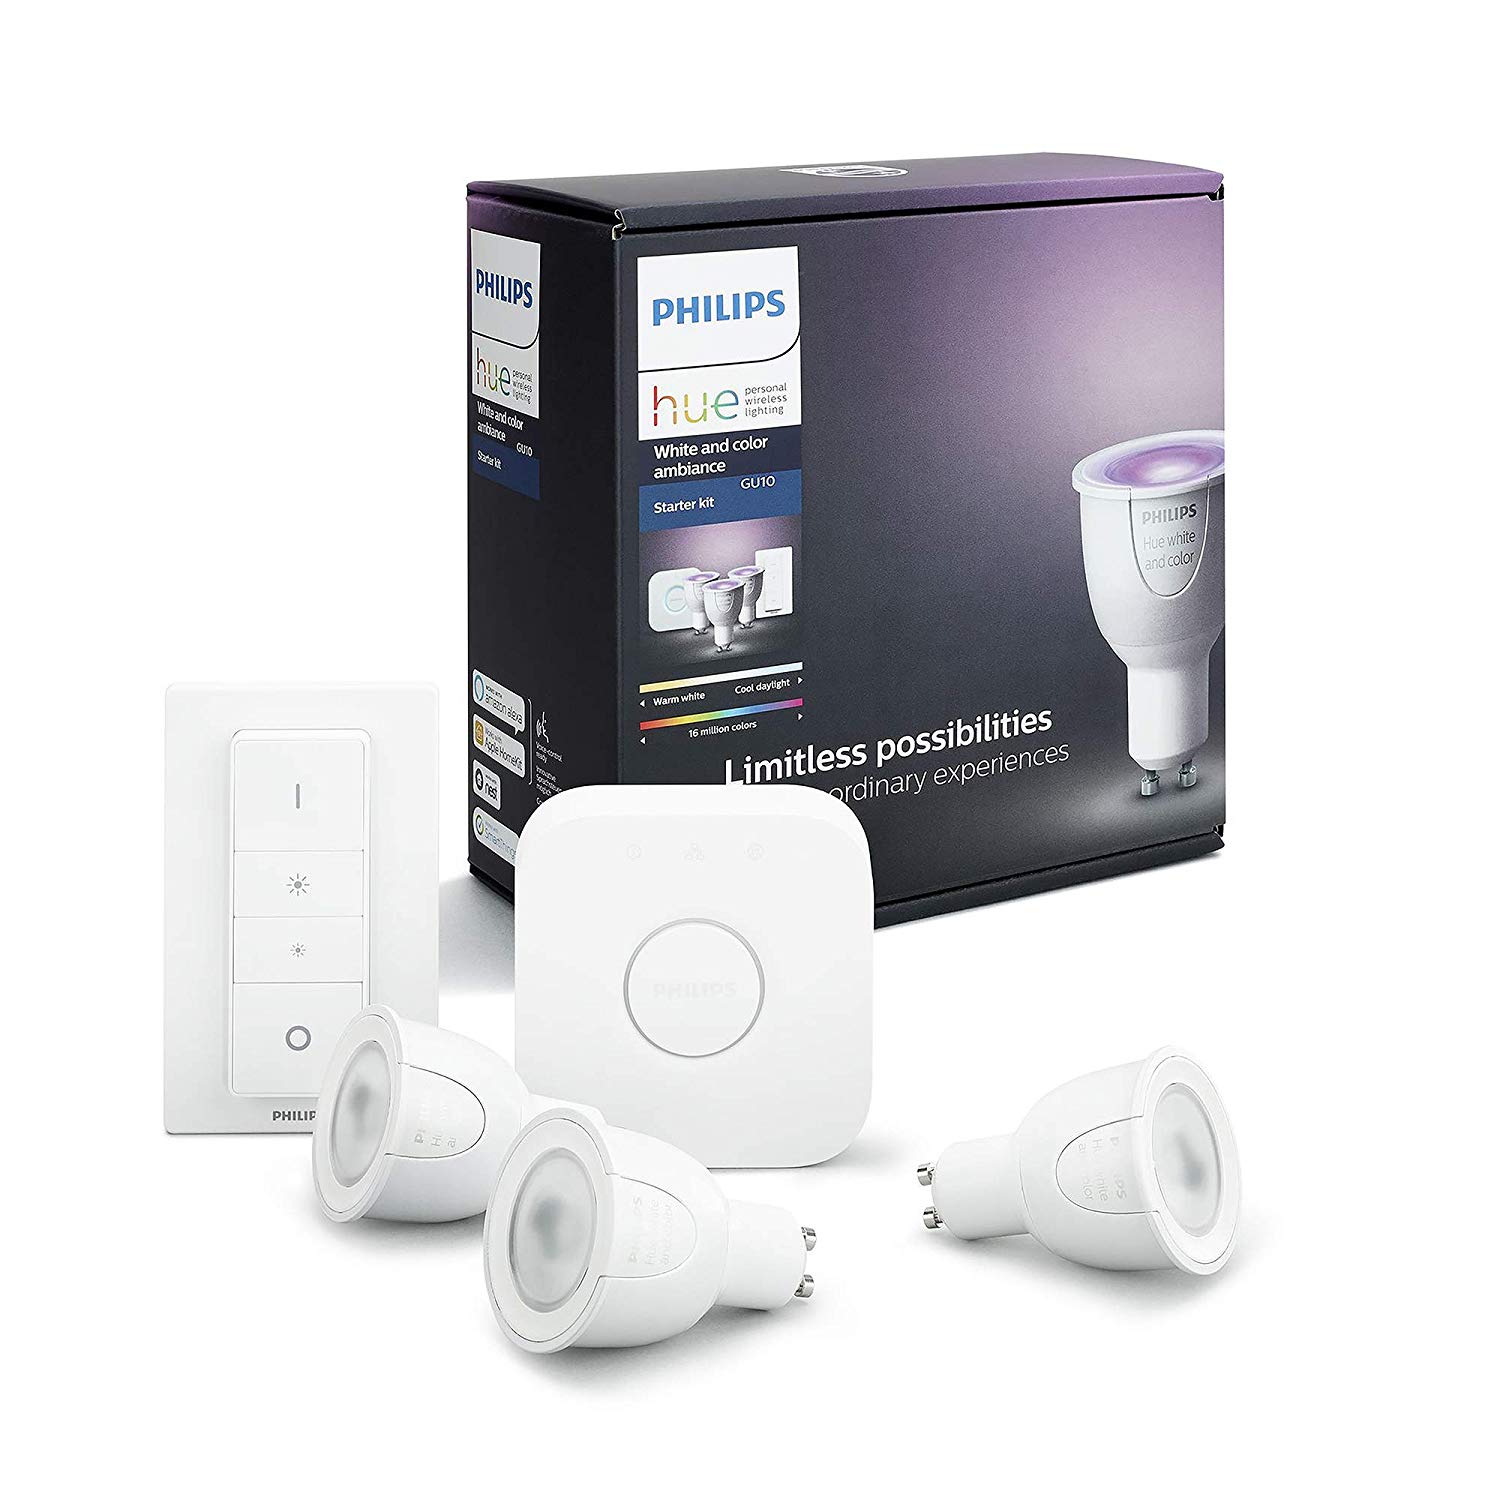 Philips Hue White and Color Ambiance GU10 LED lamp starter set, three lamps, dimmable, controllable via app, compatible with Amazon Alexa (Echo, Echo Dot) [energy class A] [Energy Class A+]